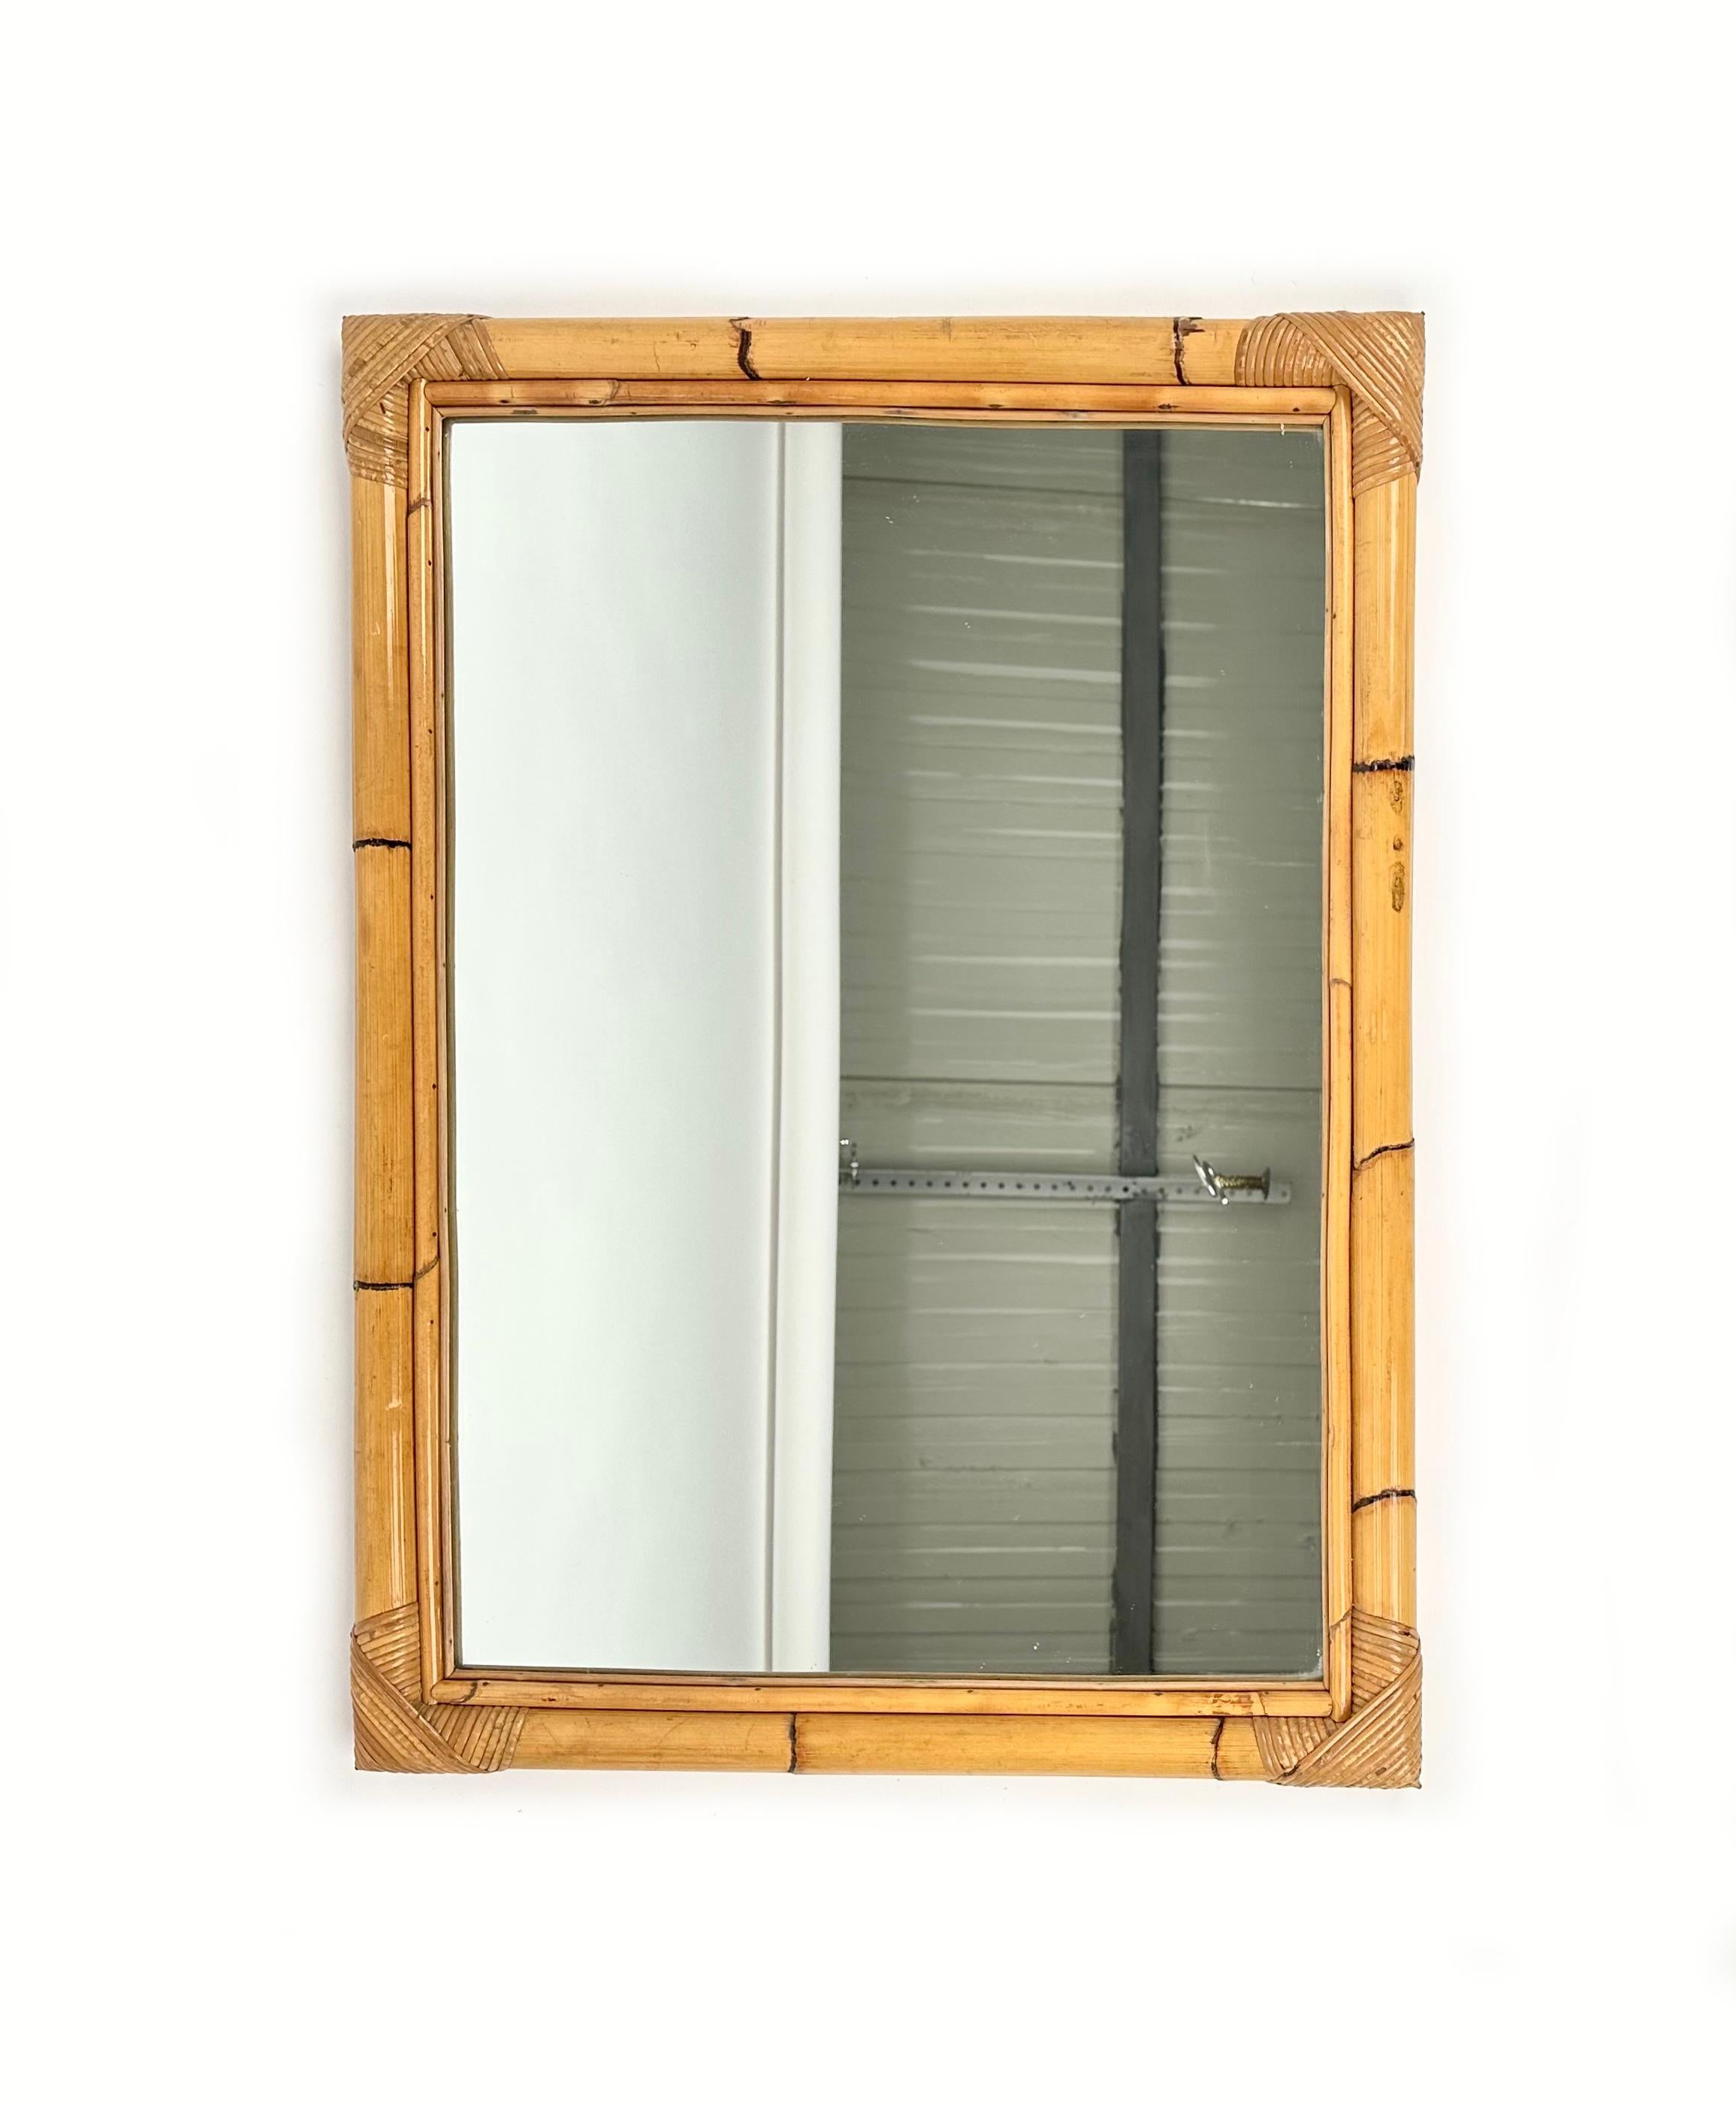 Mid-Century Rectangular Wall Mirror in Bamboo and Rattan, Italy, 1970s For Sale 1